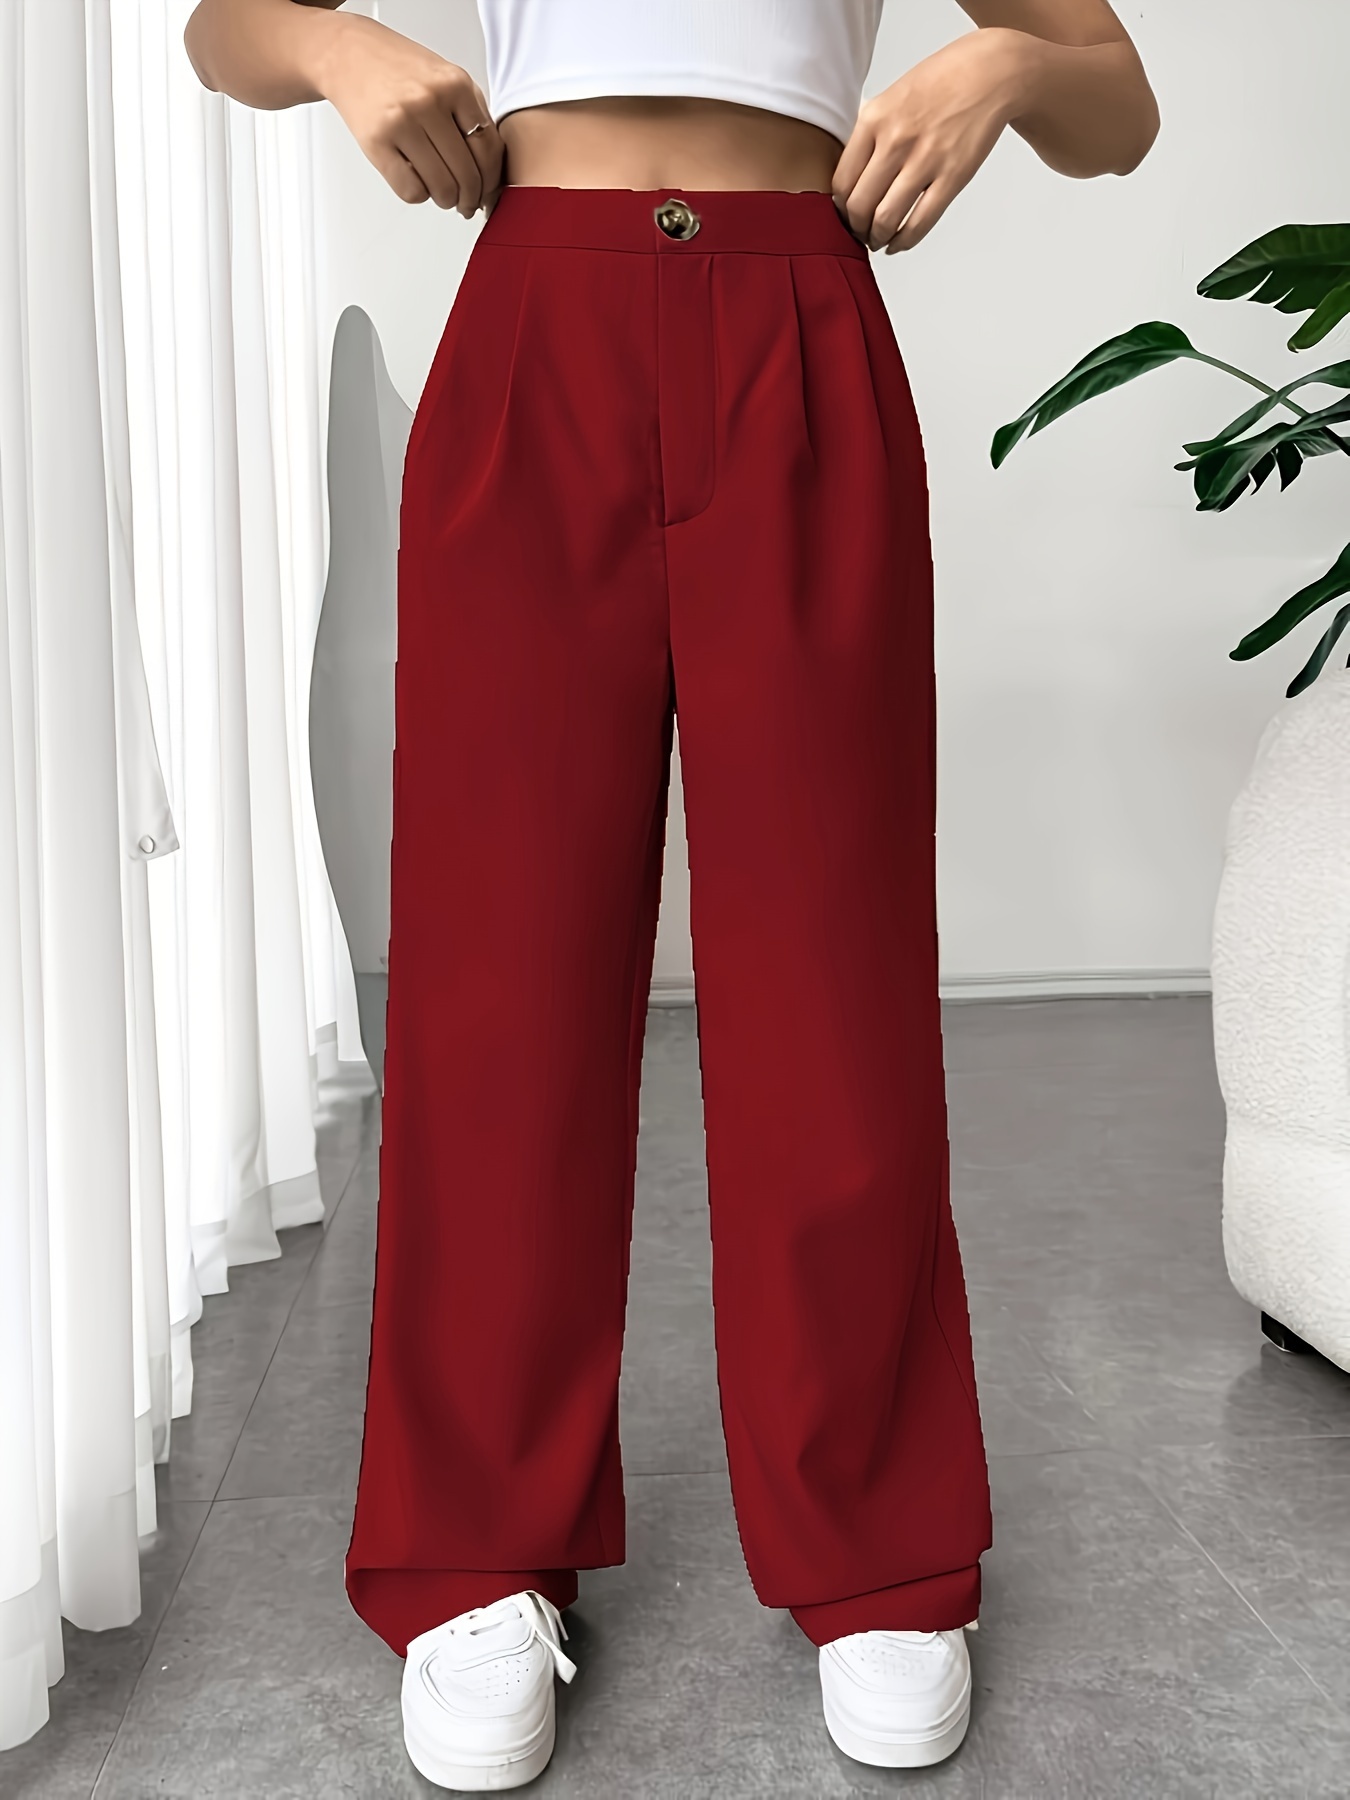 Solid Color Casual Wide Leg Pants  Casual wide leg pants, Loose pants,  Casual women